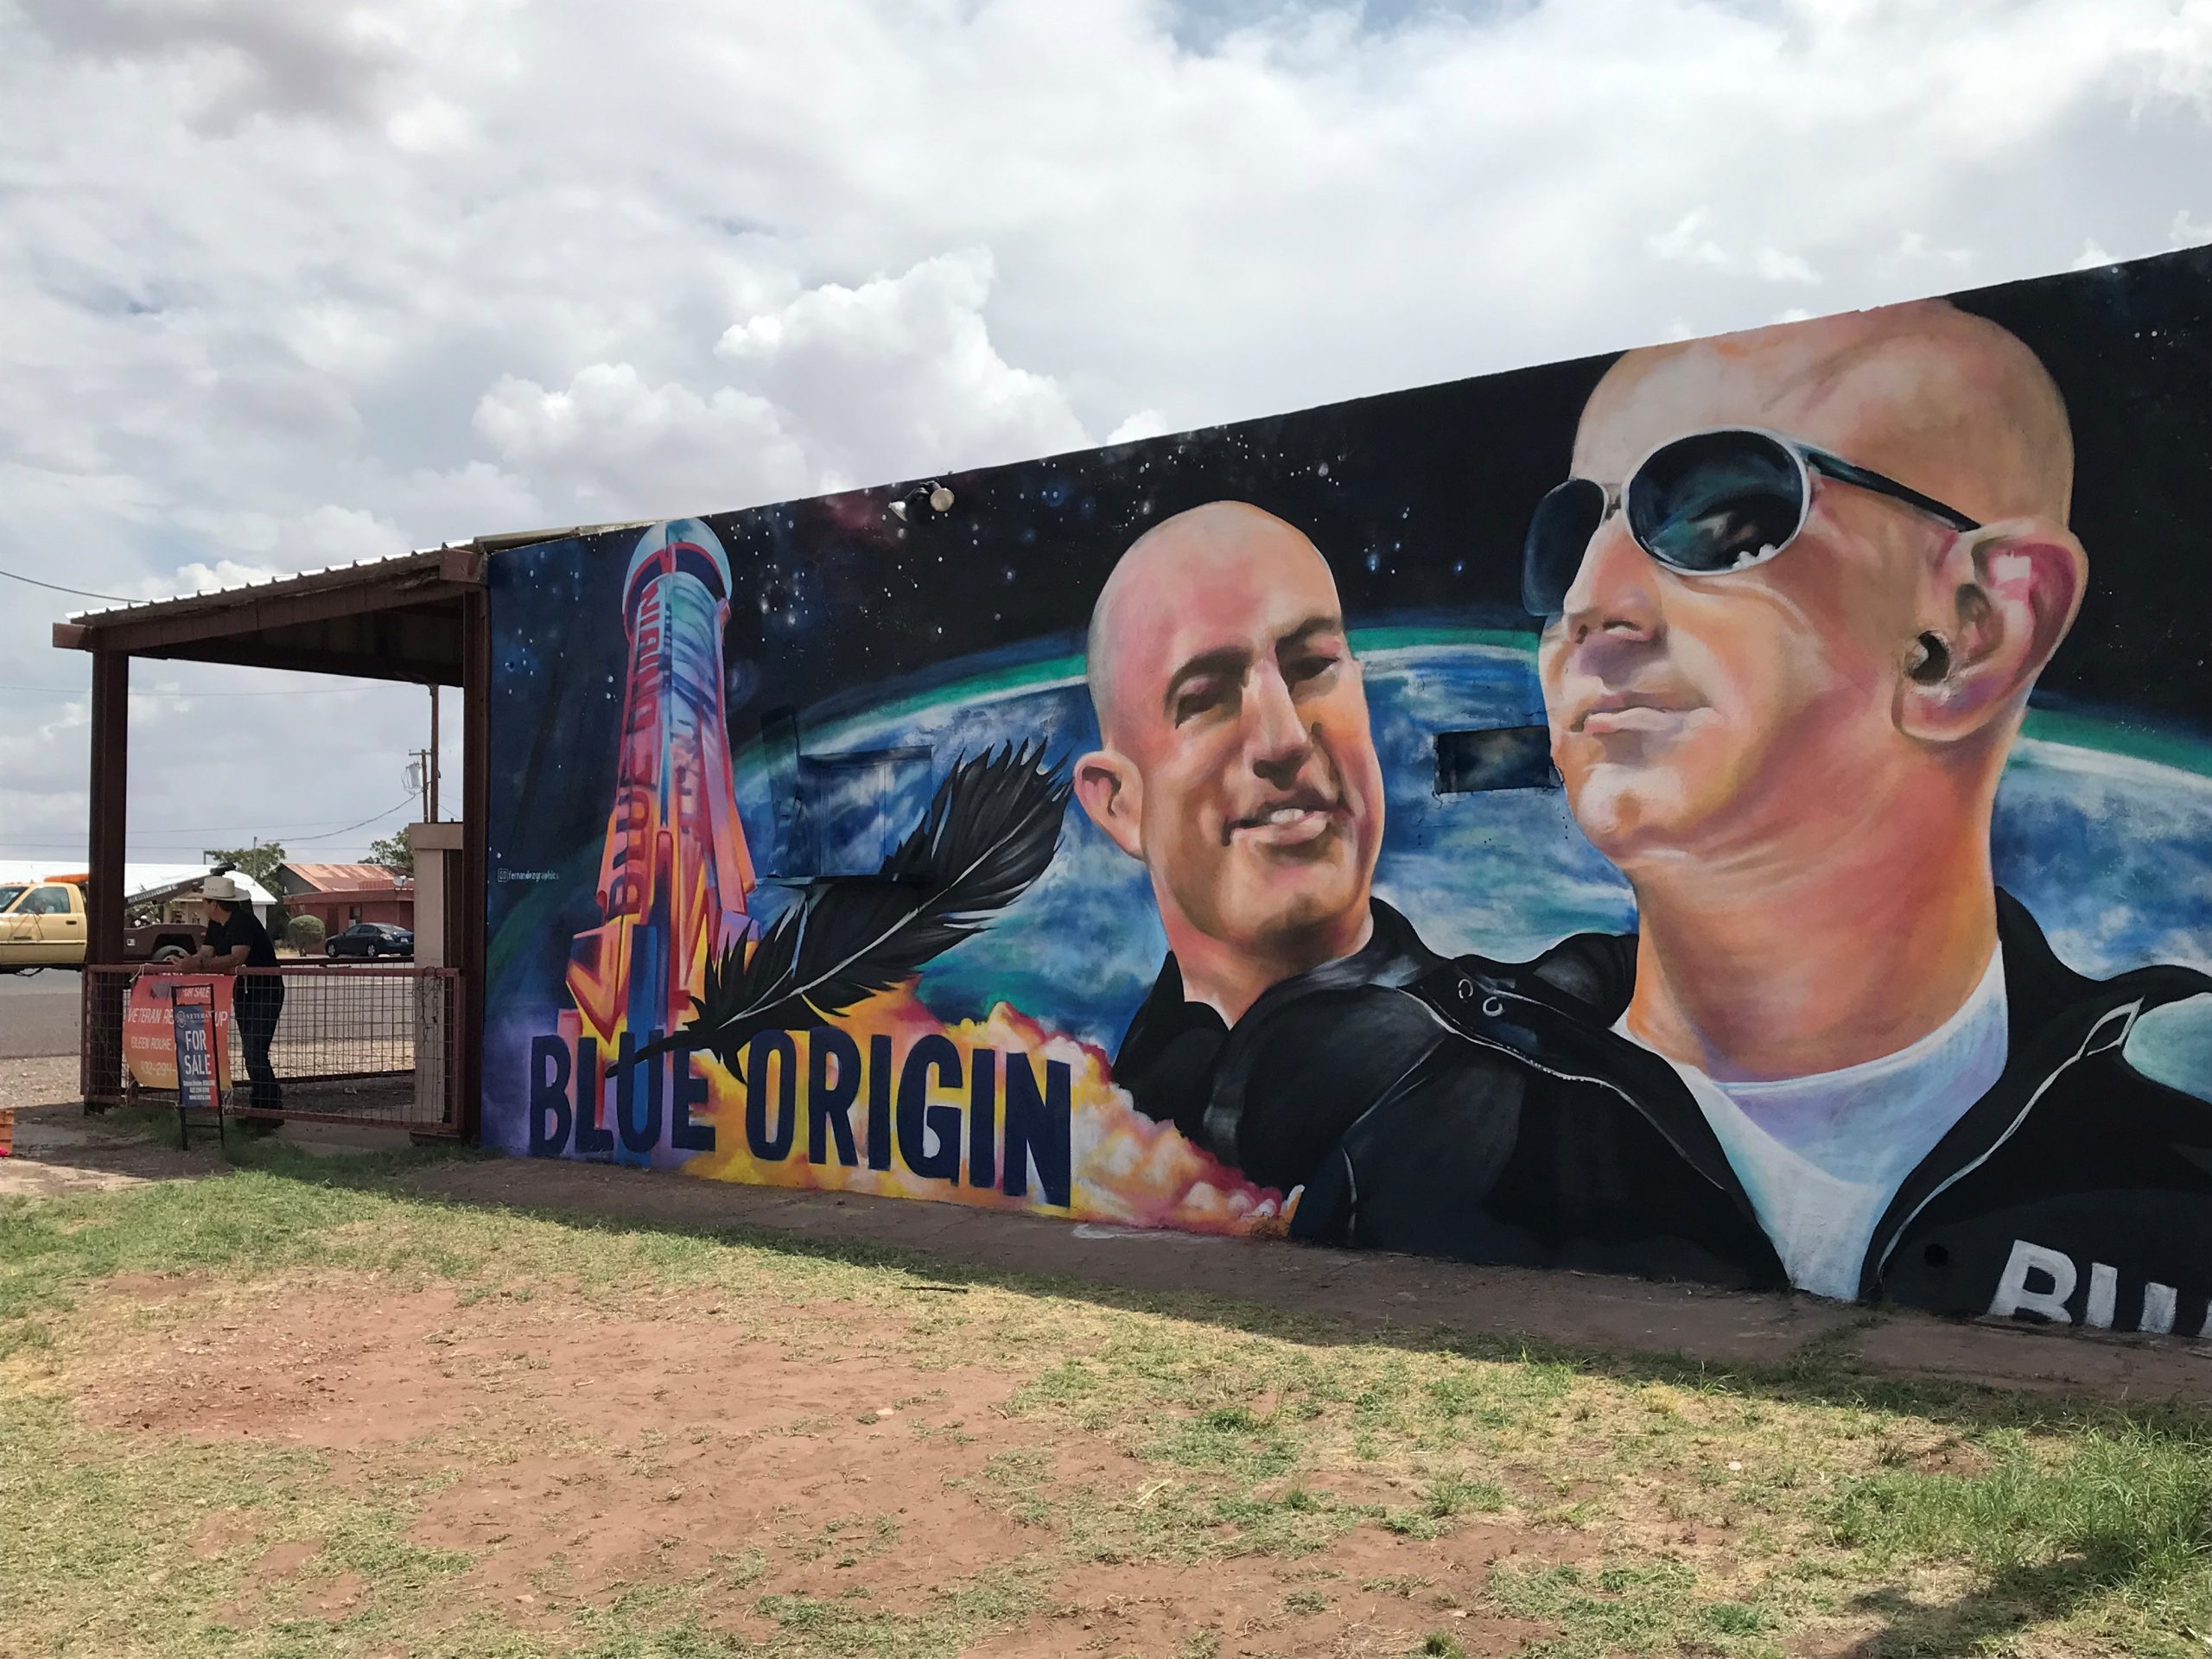 Blue Origin’s space shots give tiny Texas town a boost